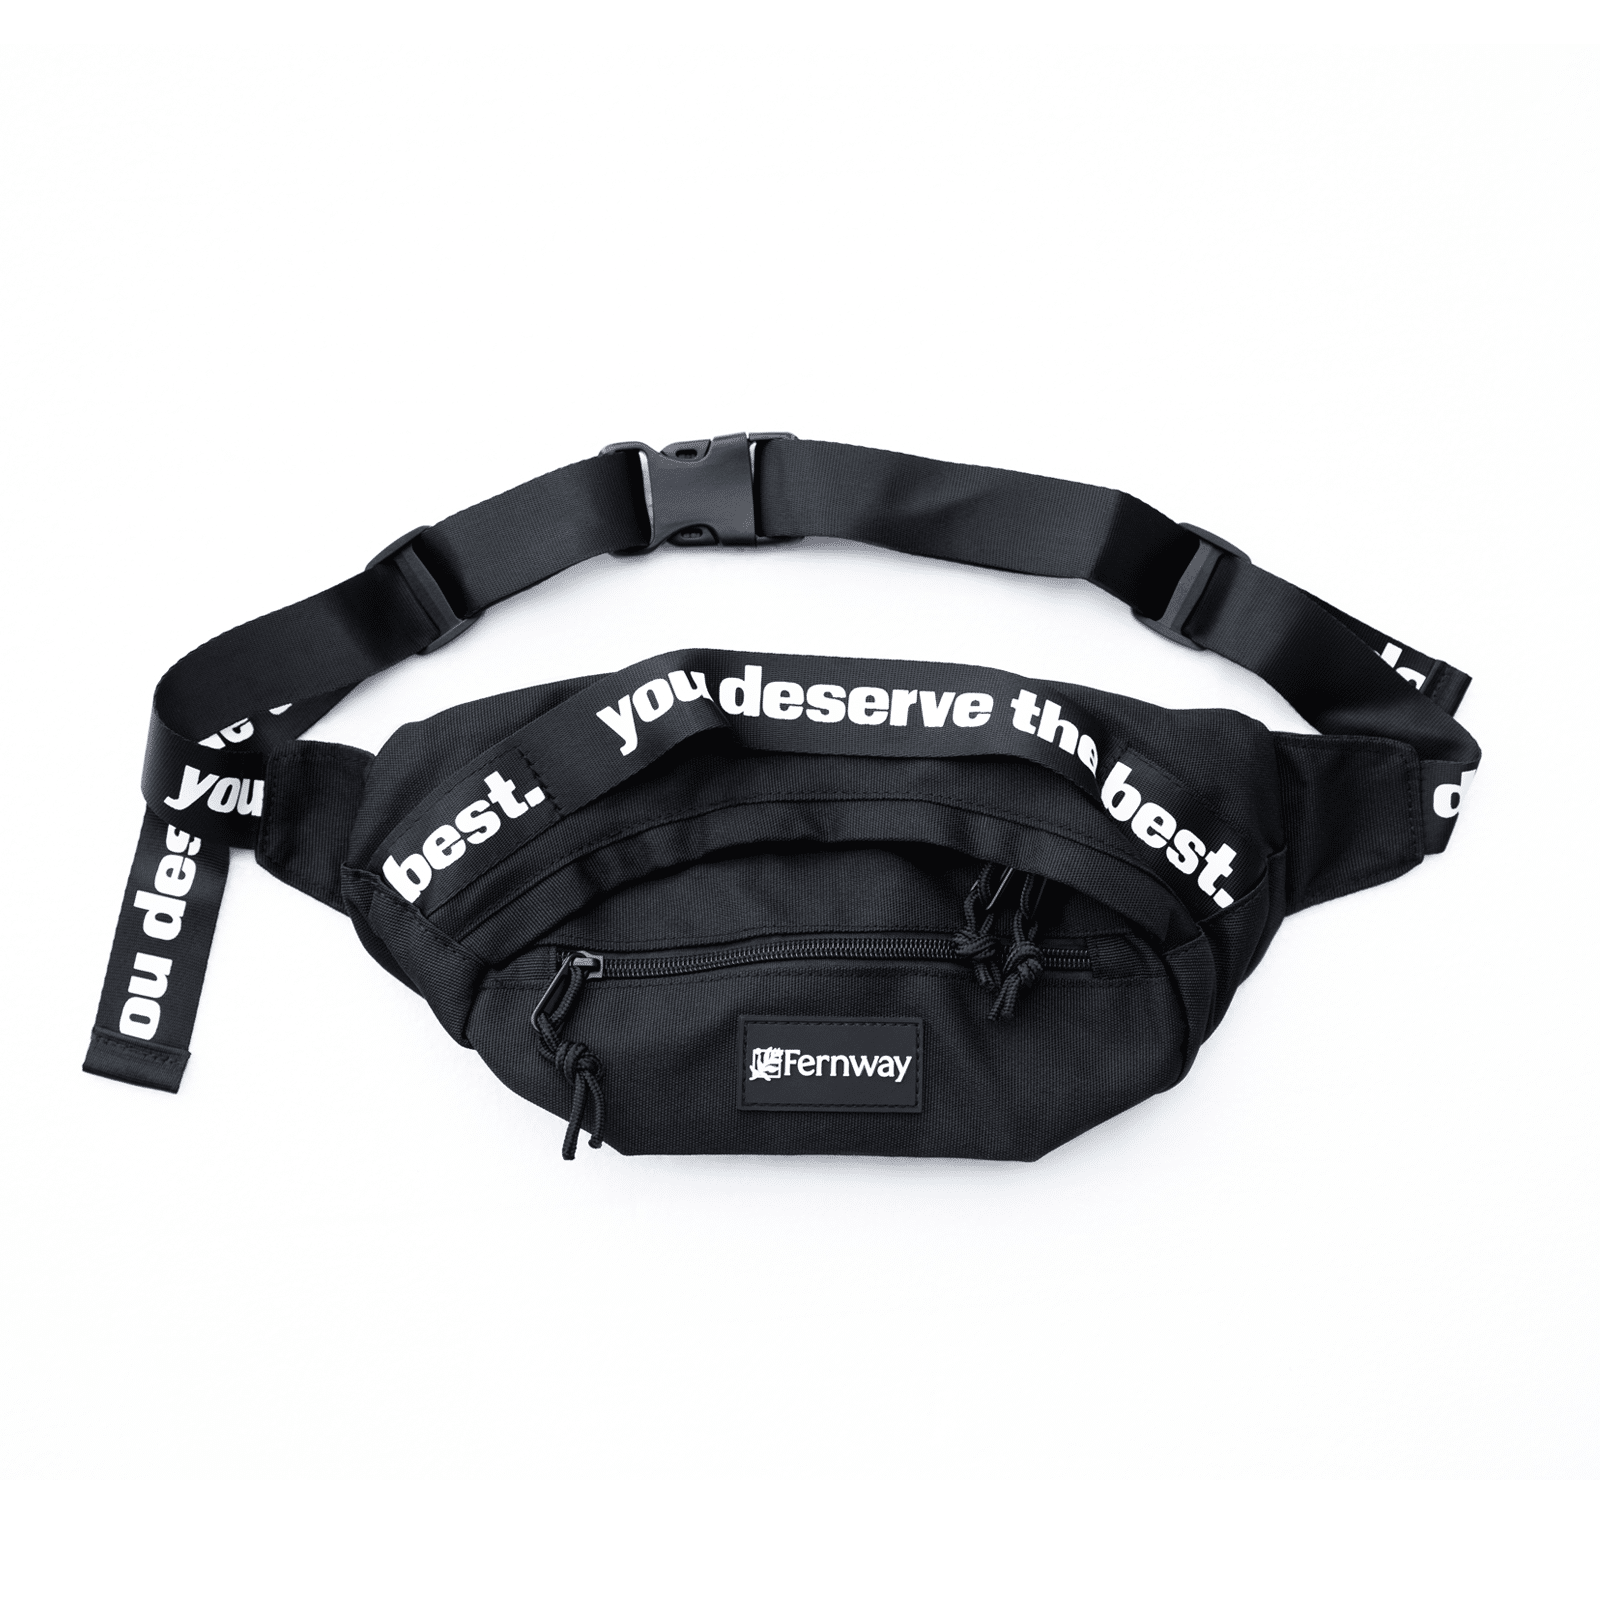 Fernway Fanny Pack - Fernway Store